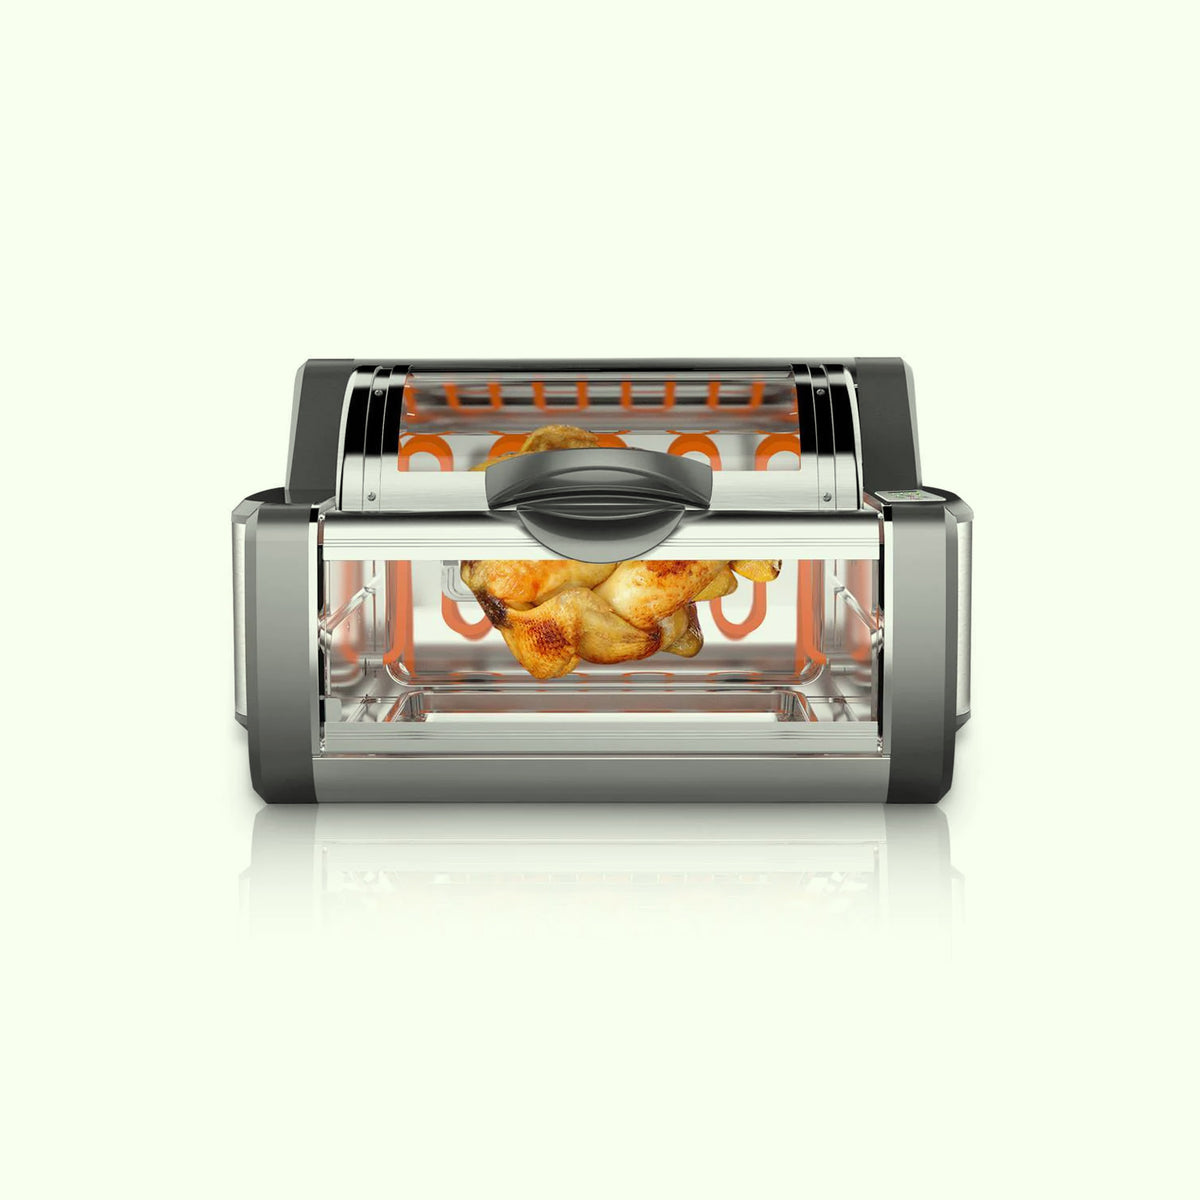 NutriChefKitchen 30 Quarts Kitchen Convection Oven - 1400 Watt Countertop,  Rotisserie Roaster Grill, Top Rack, Dual Hot Plates, Toaster, Baking Tray